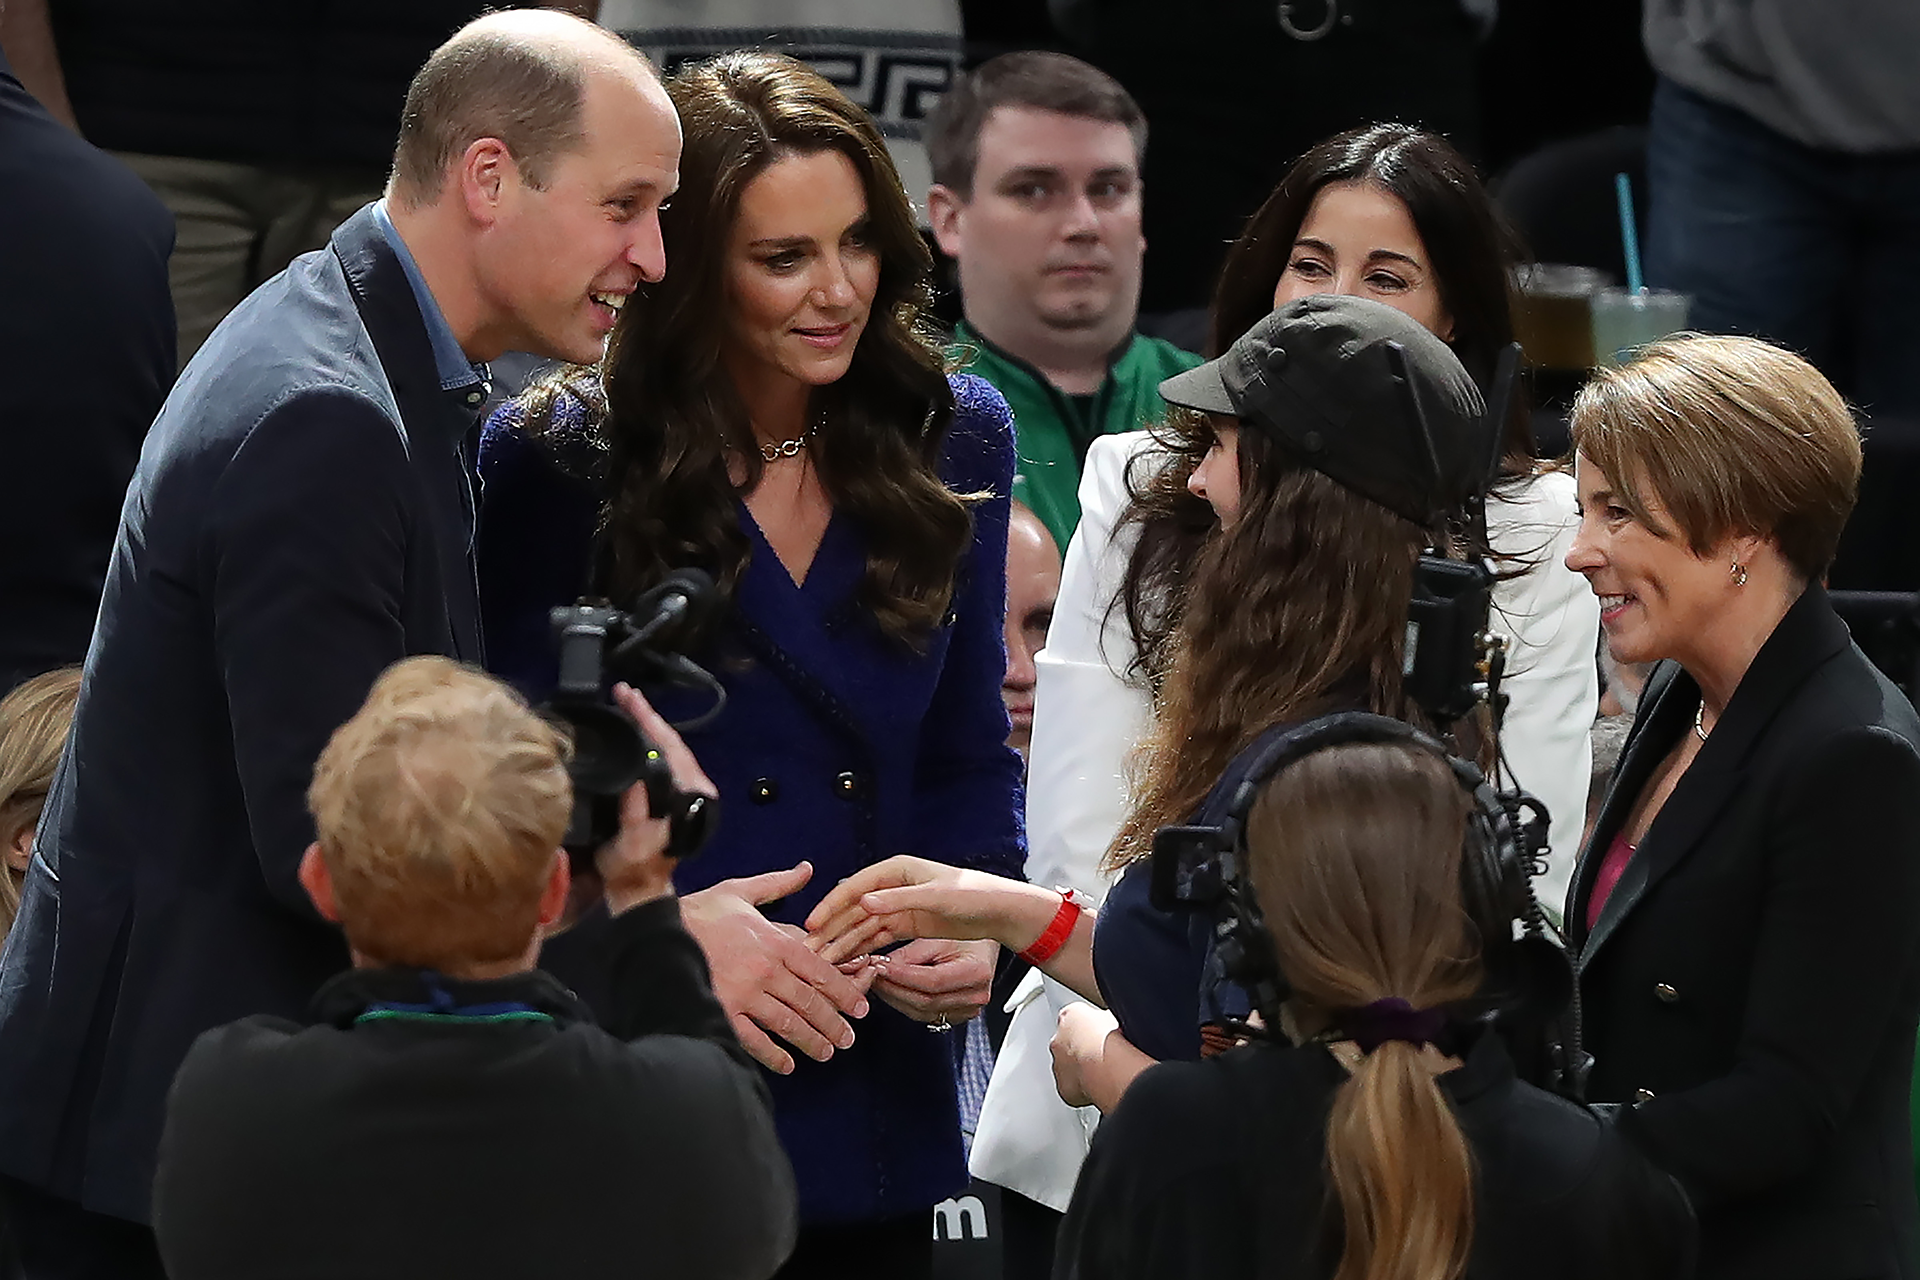 Prince William extends his hand to shake Ollie Perrault's hand. Princess Kate stands next to her husband smiling at Ollie. Cameramen surround them to take a photo of the interaction.